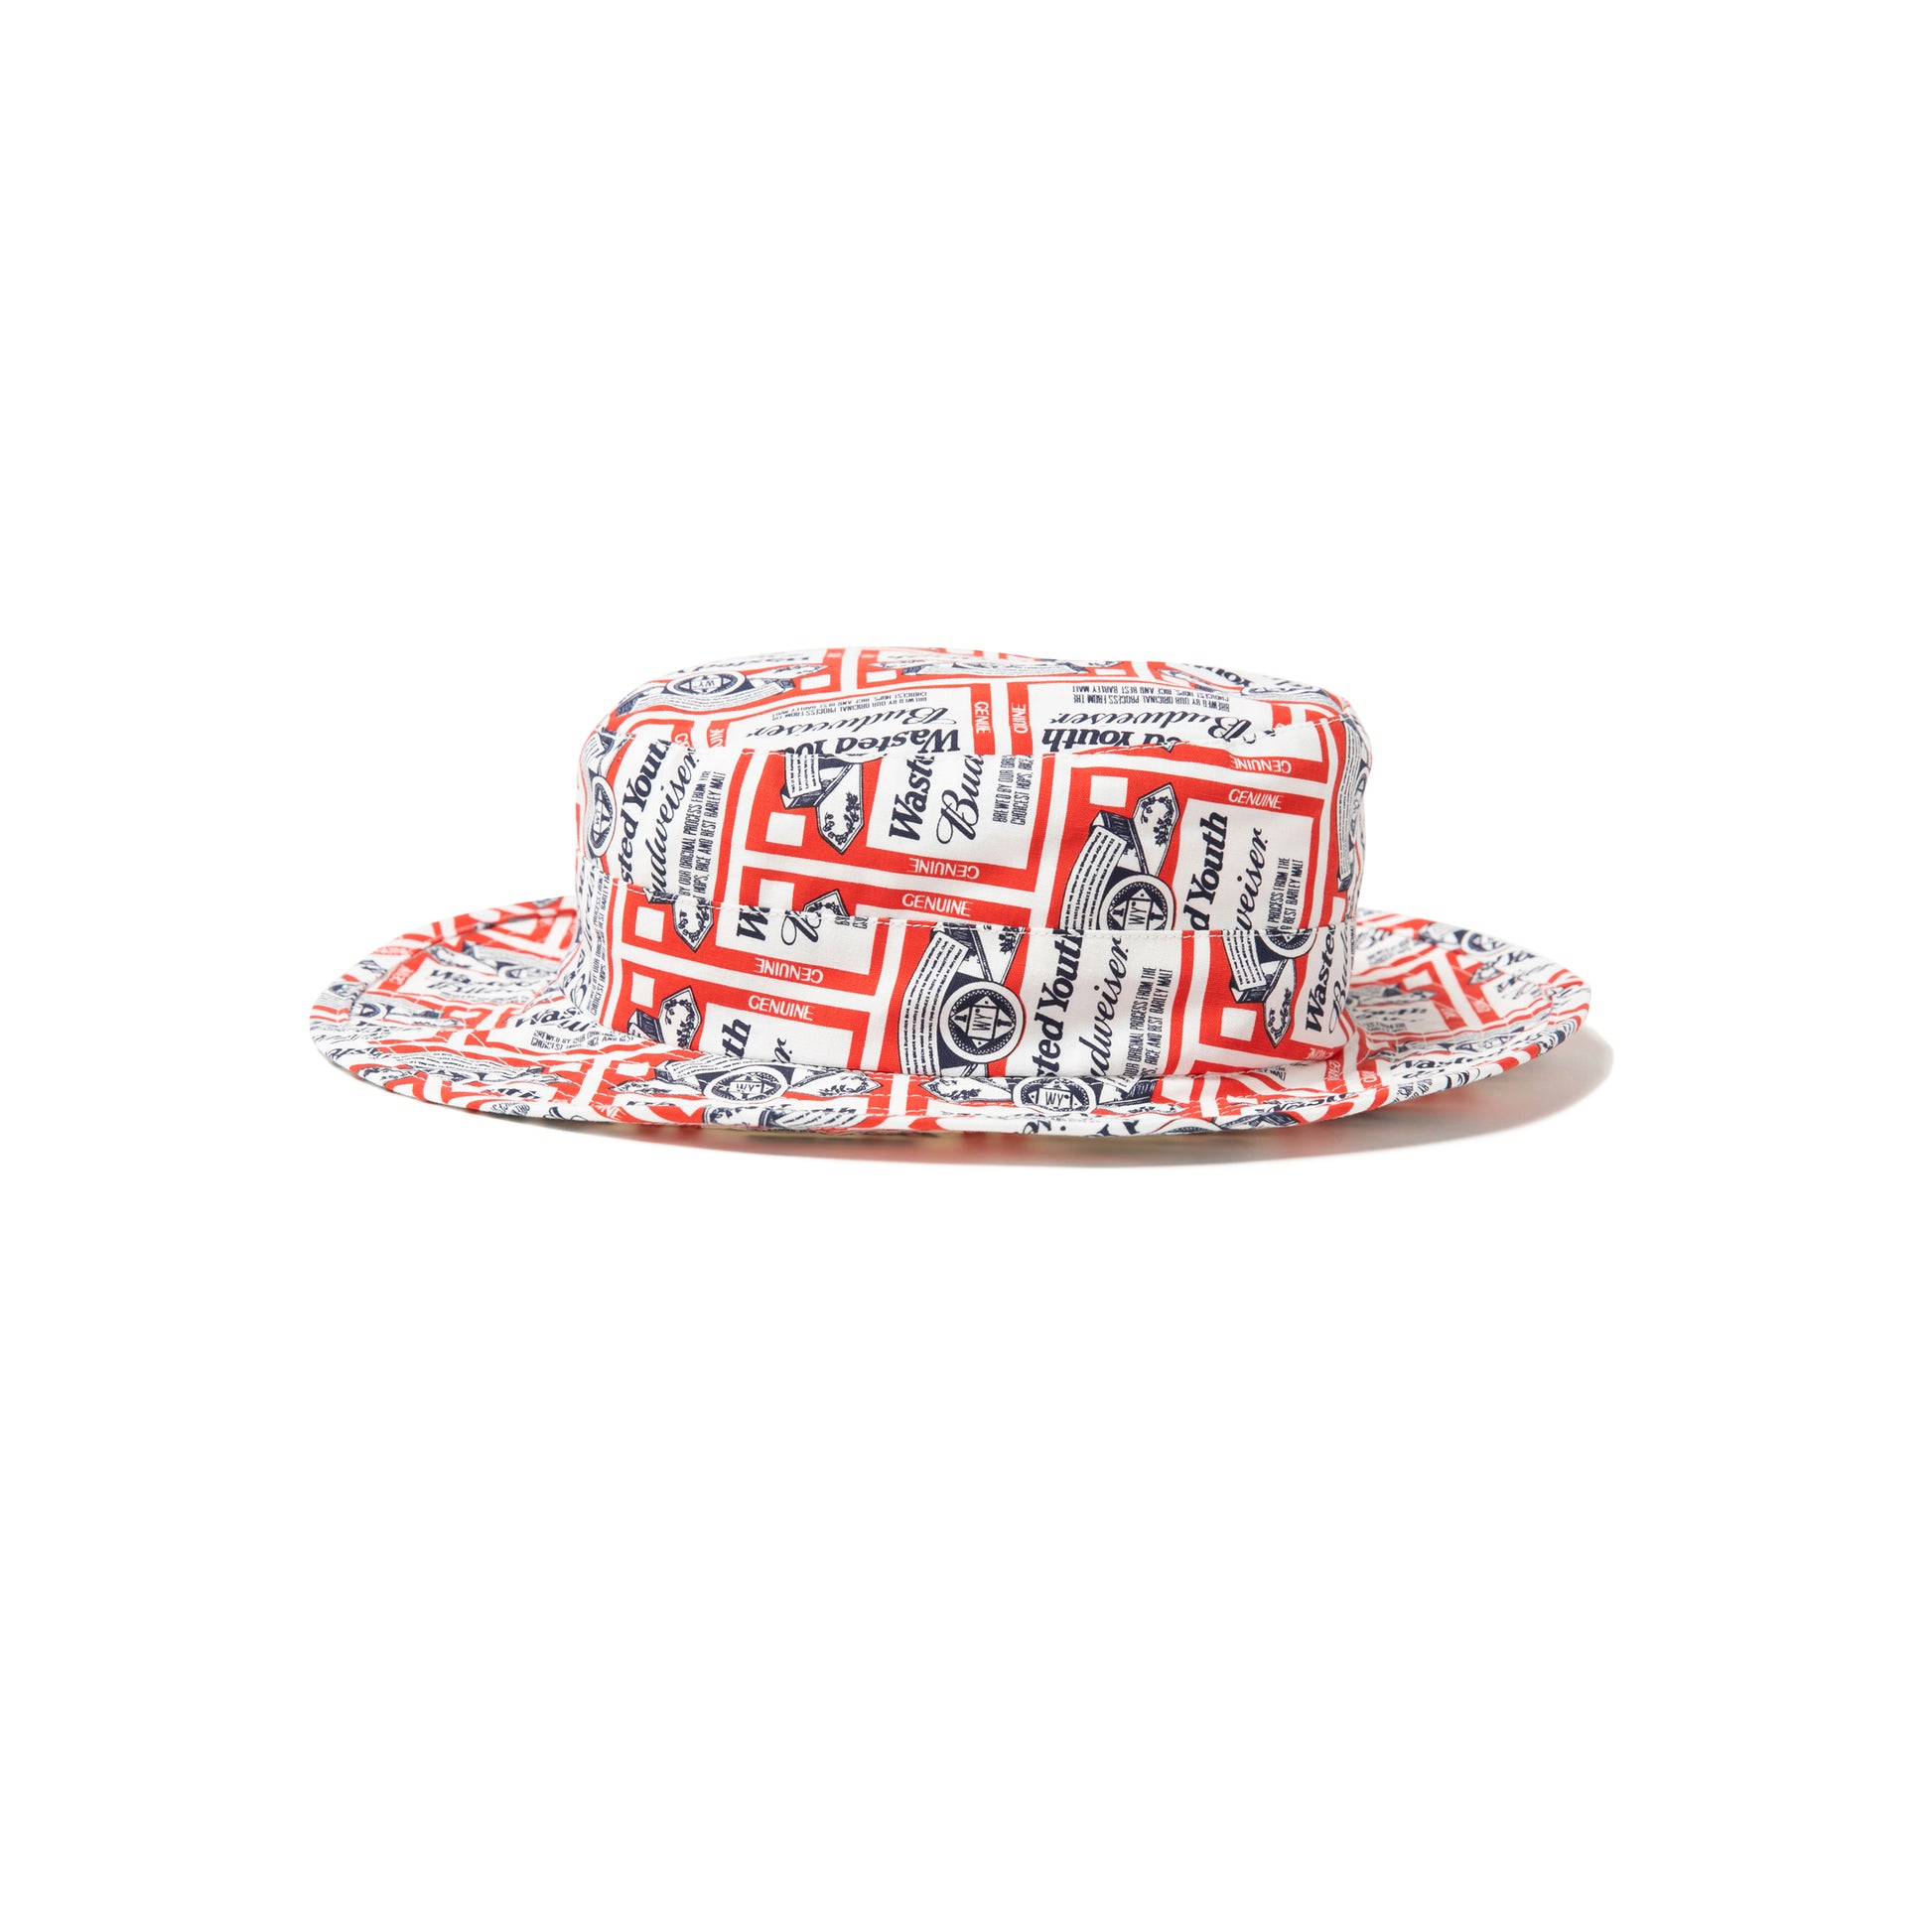 WastedYouth Budweiser バケットハット hat m